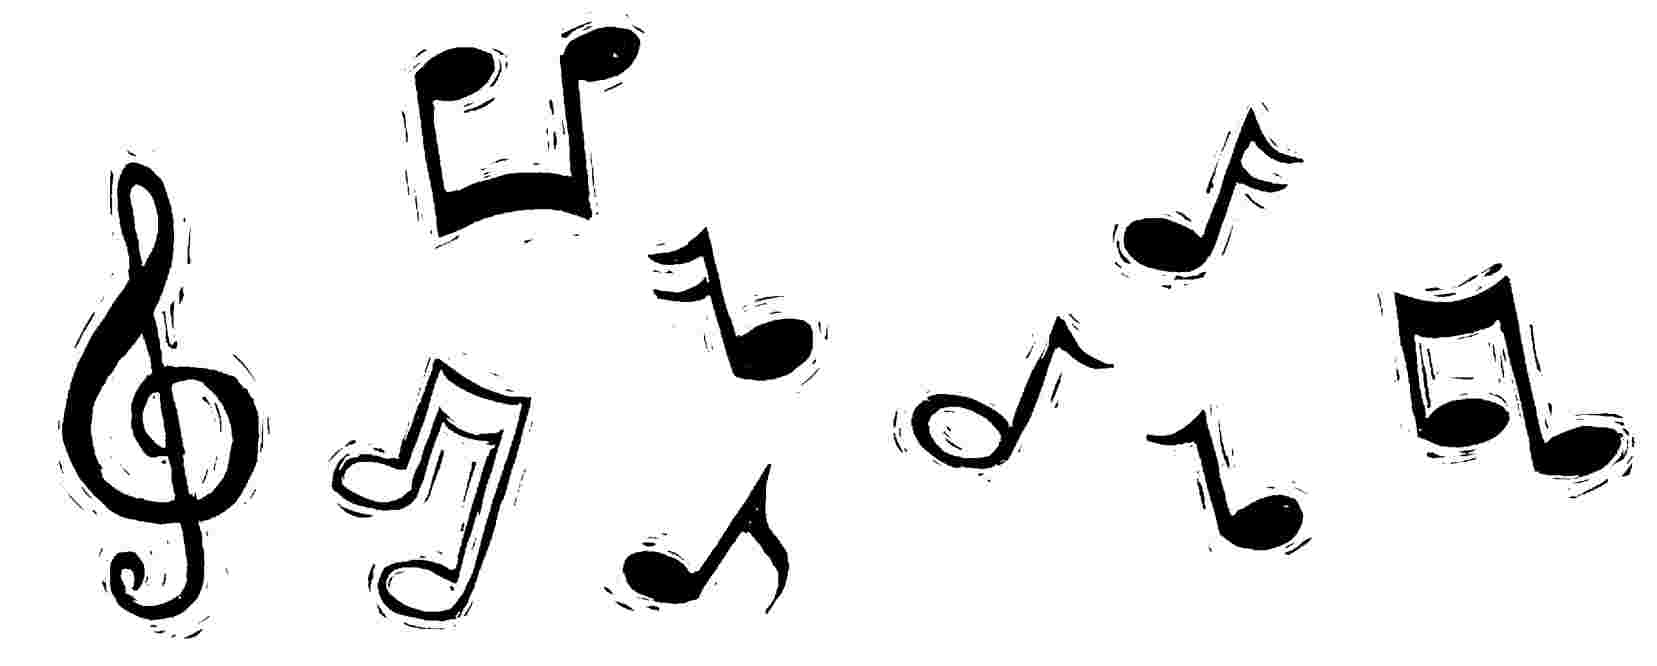 Pictures Of Music Notes And Symbols - ClipArt Best